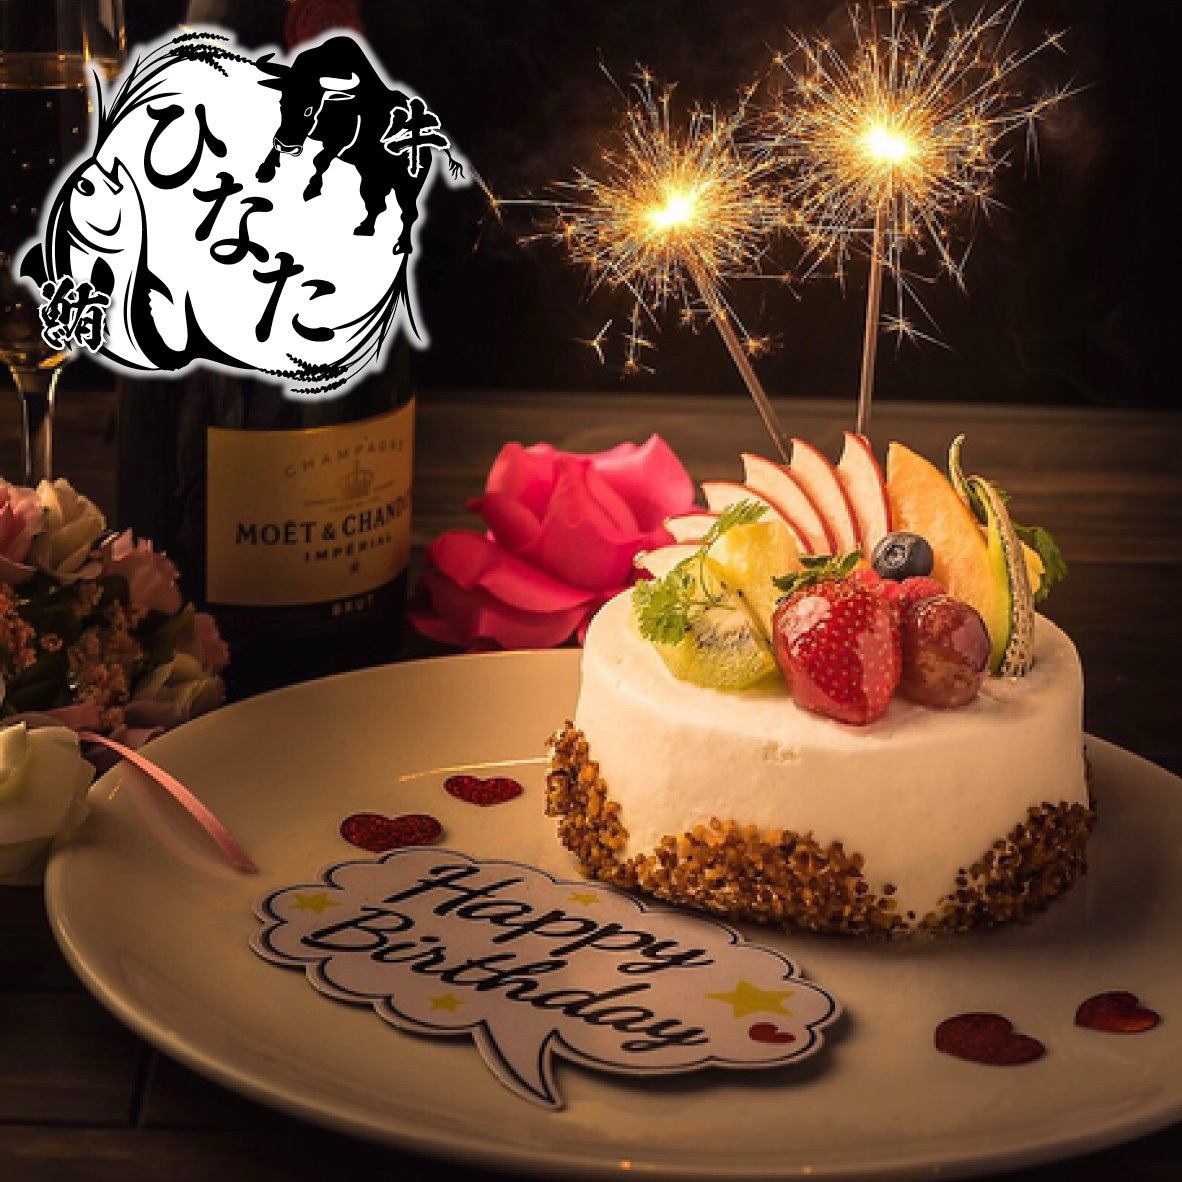 Special celebration ♪ Anniversary or birthday surprise for your loved one ★